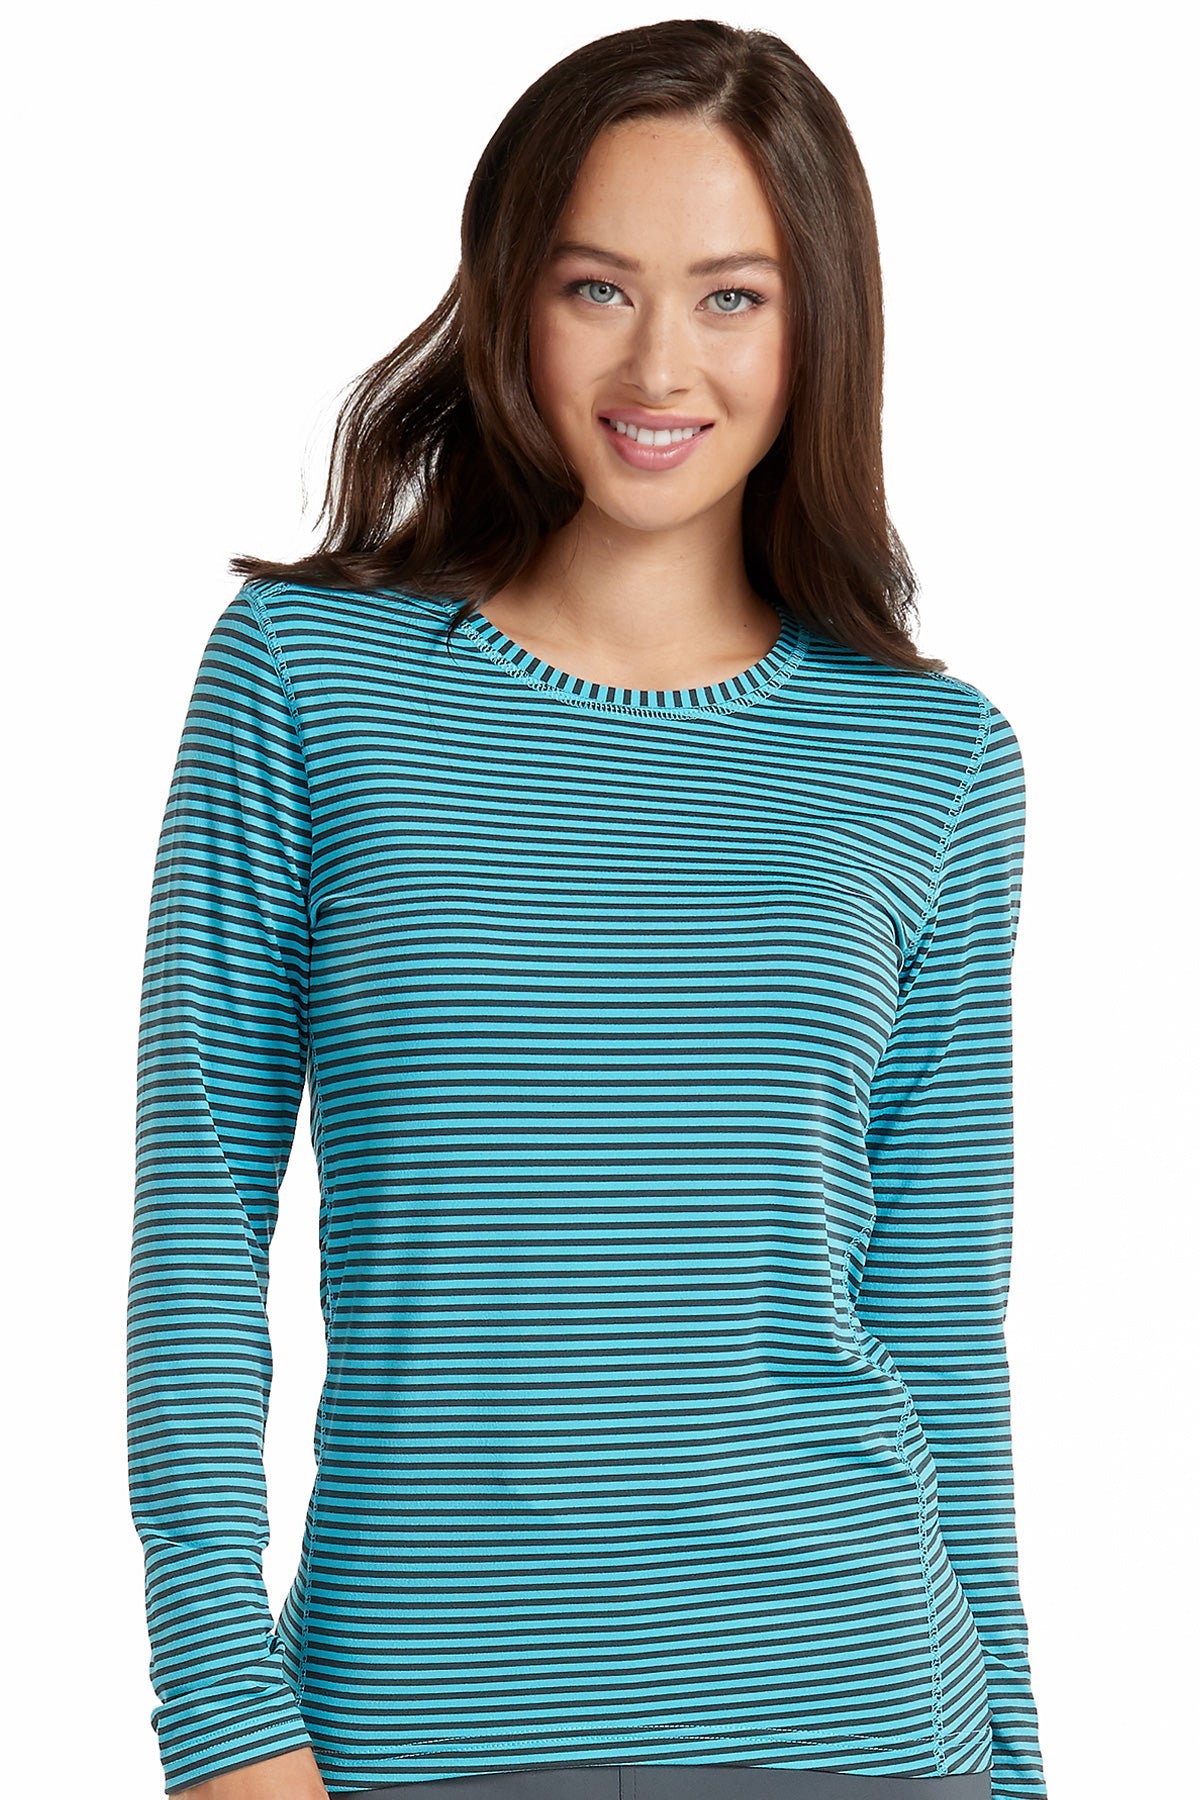 Med Couture Scrub Tee Activate Performance Stripe in Pewter and Turquoise at Parker's Clothing and Shoes.